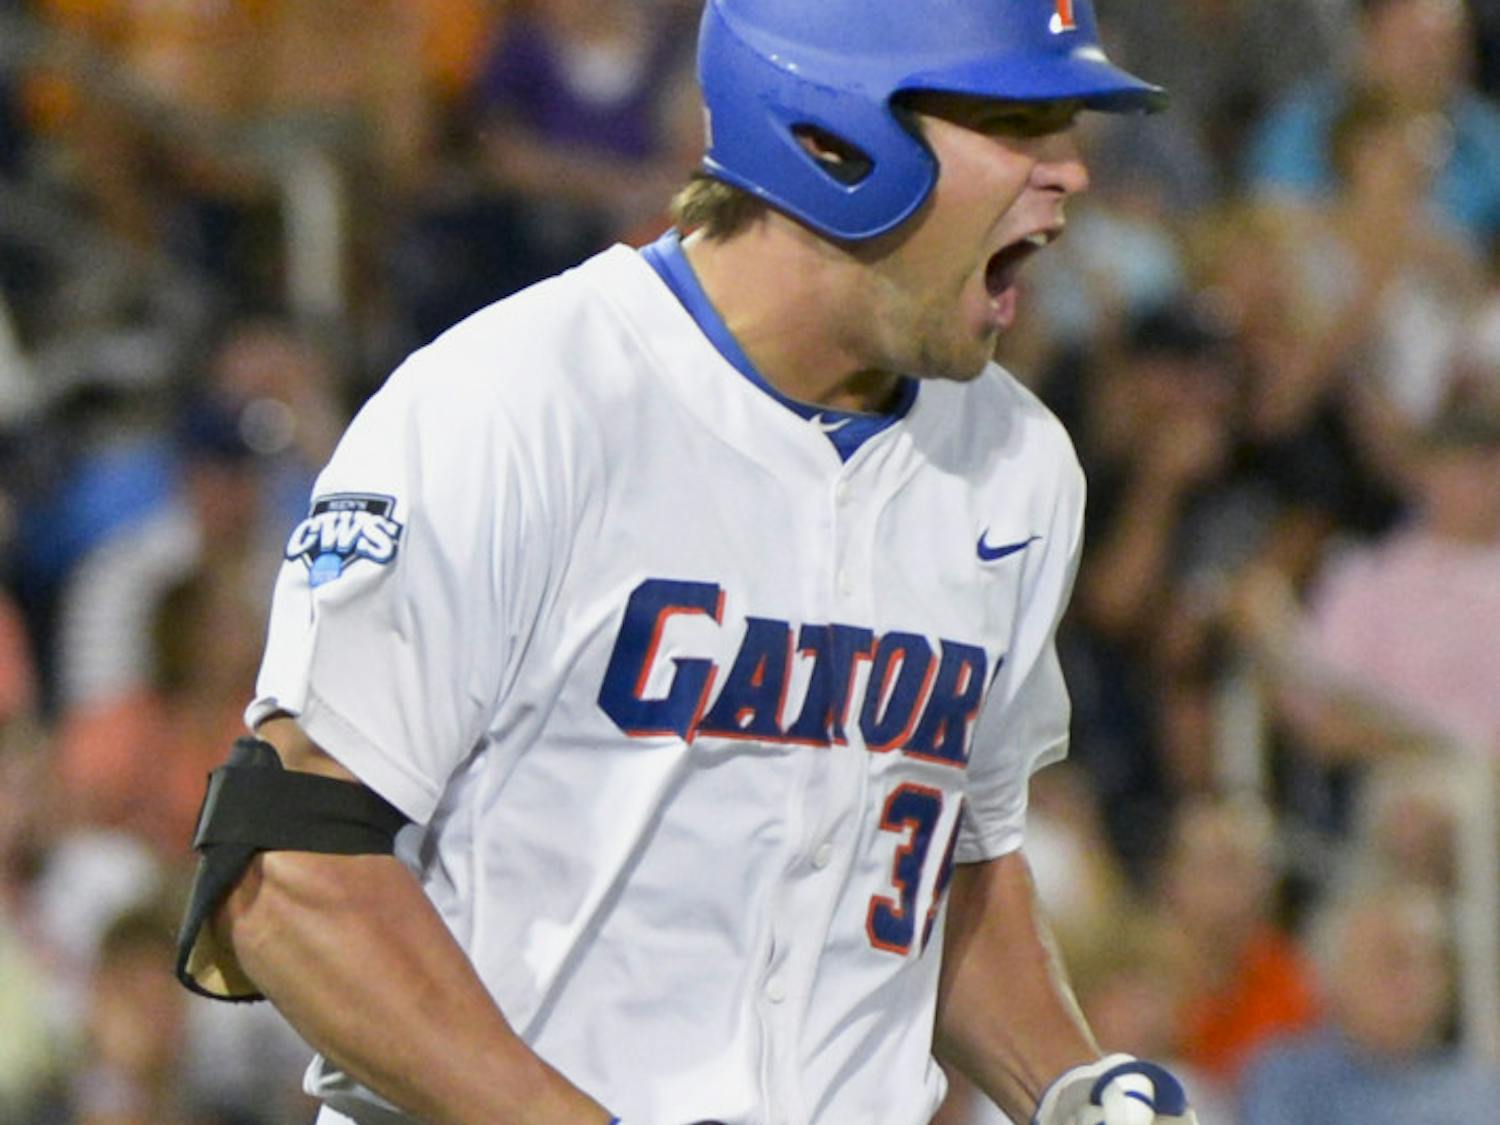 Florida's Brian Johnson yells after lining out to South Carolina right fielder Adam Matthews in the seventh inning of an NCAA College World Series baseball game in Omaha, Neb., Saturday, June 16, 2012.